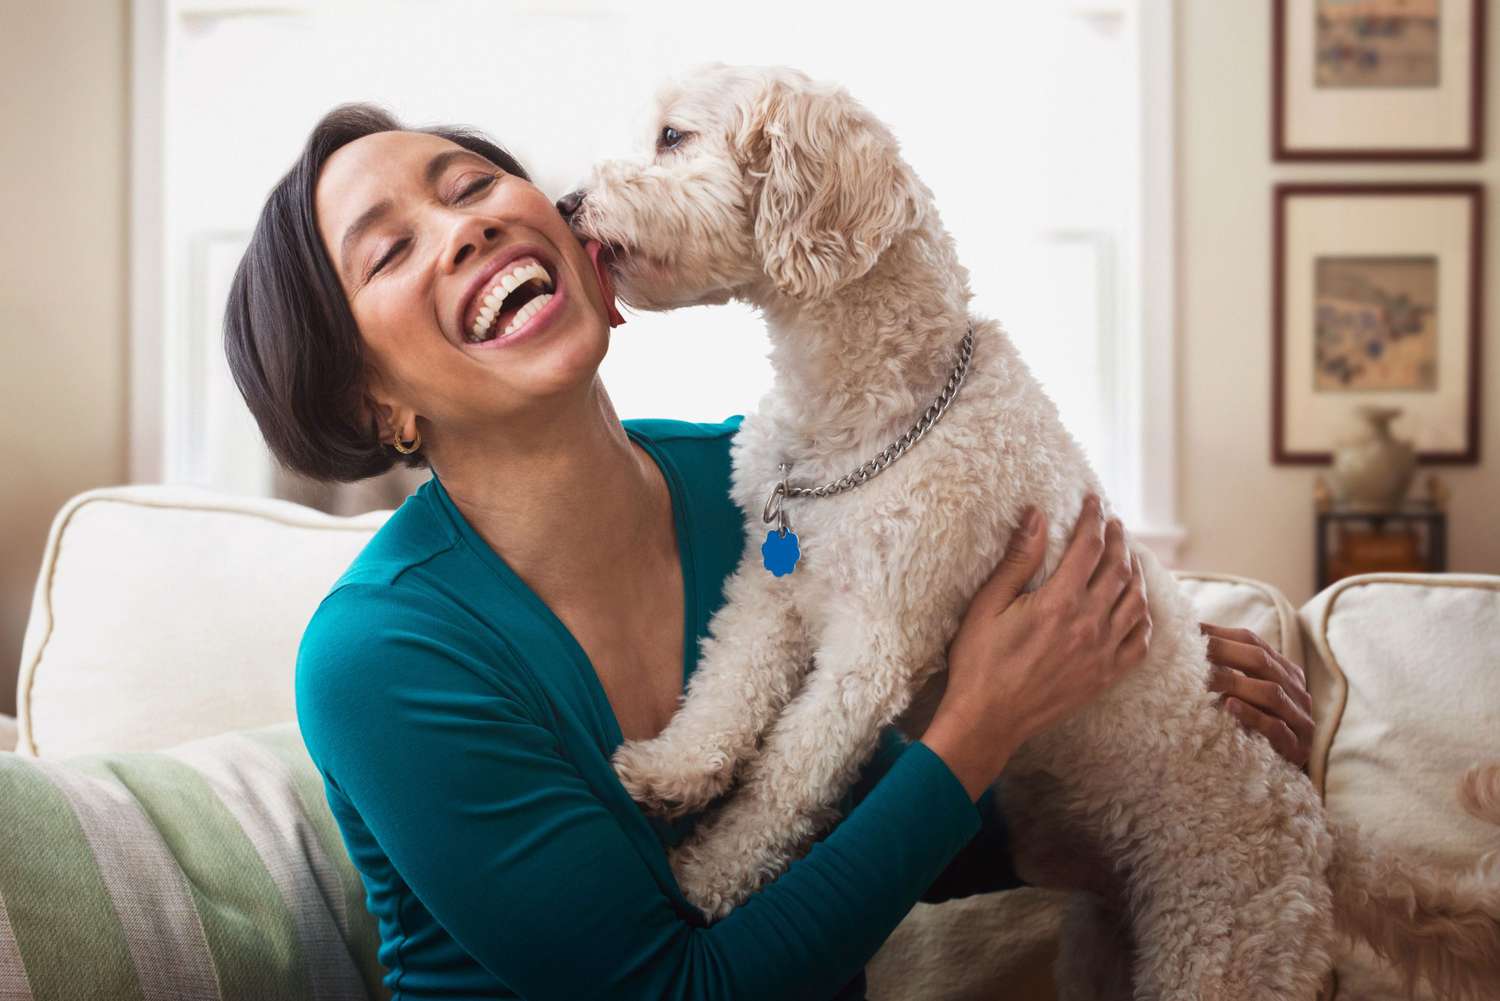 smiling woman with dog licking her face